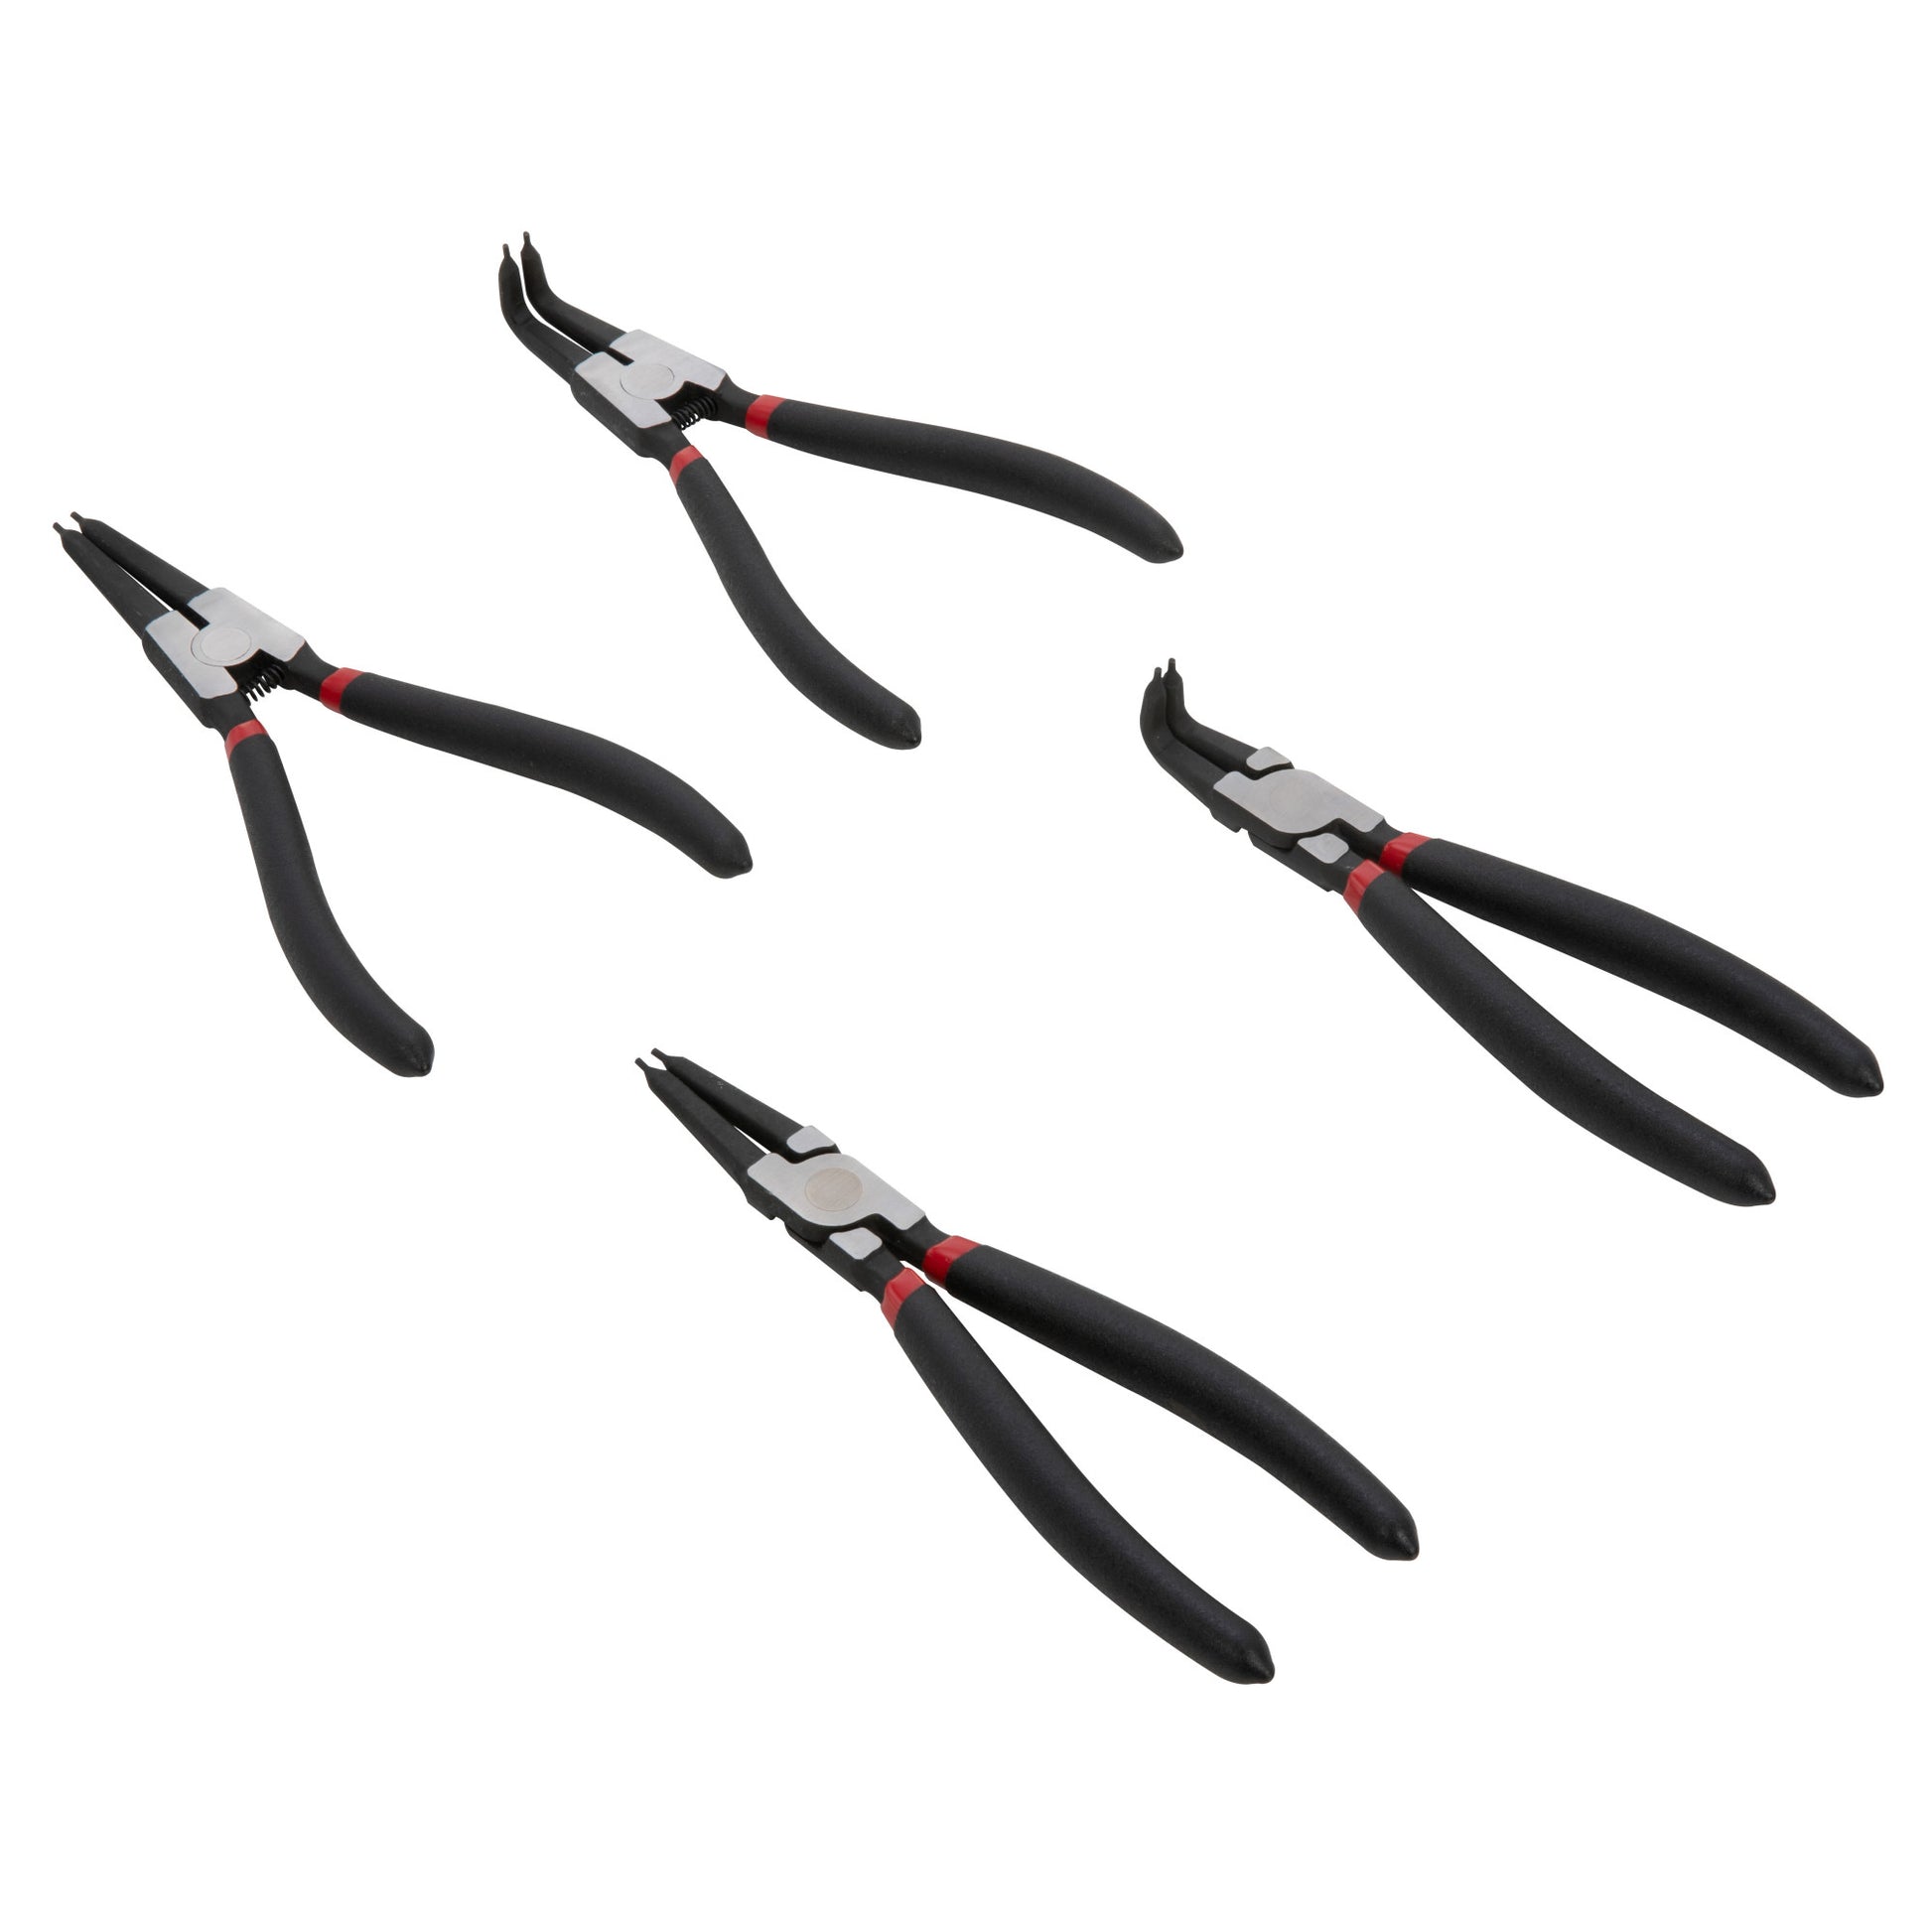 CRAFTSMAN Snap Ring Plier Set, 4-Pack, 7 inch, Straight and Curved